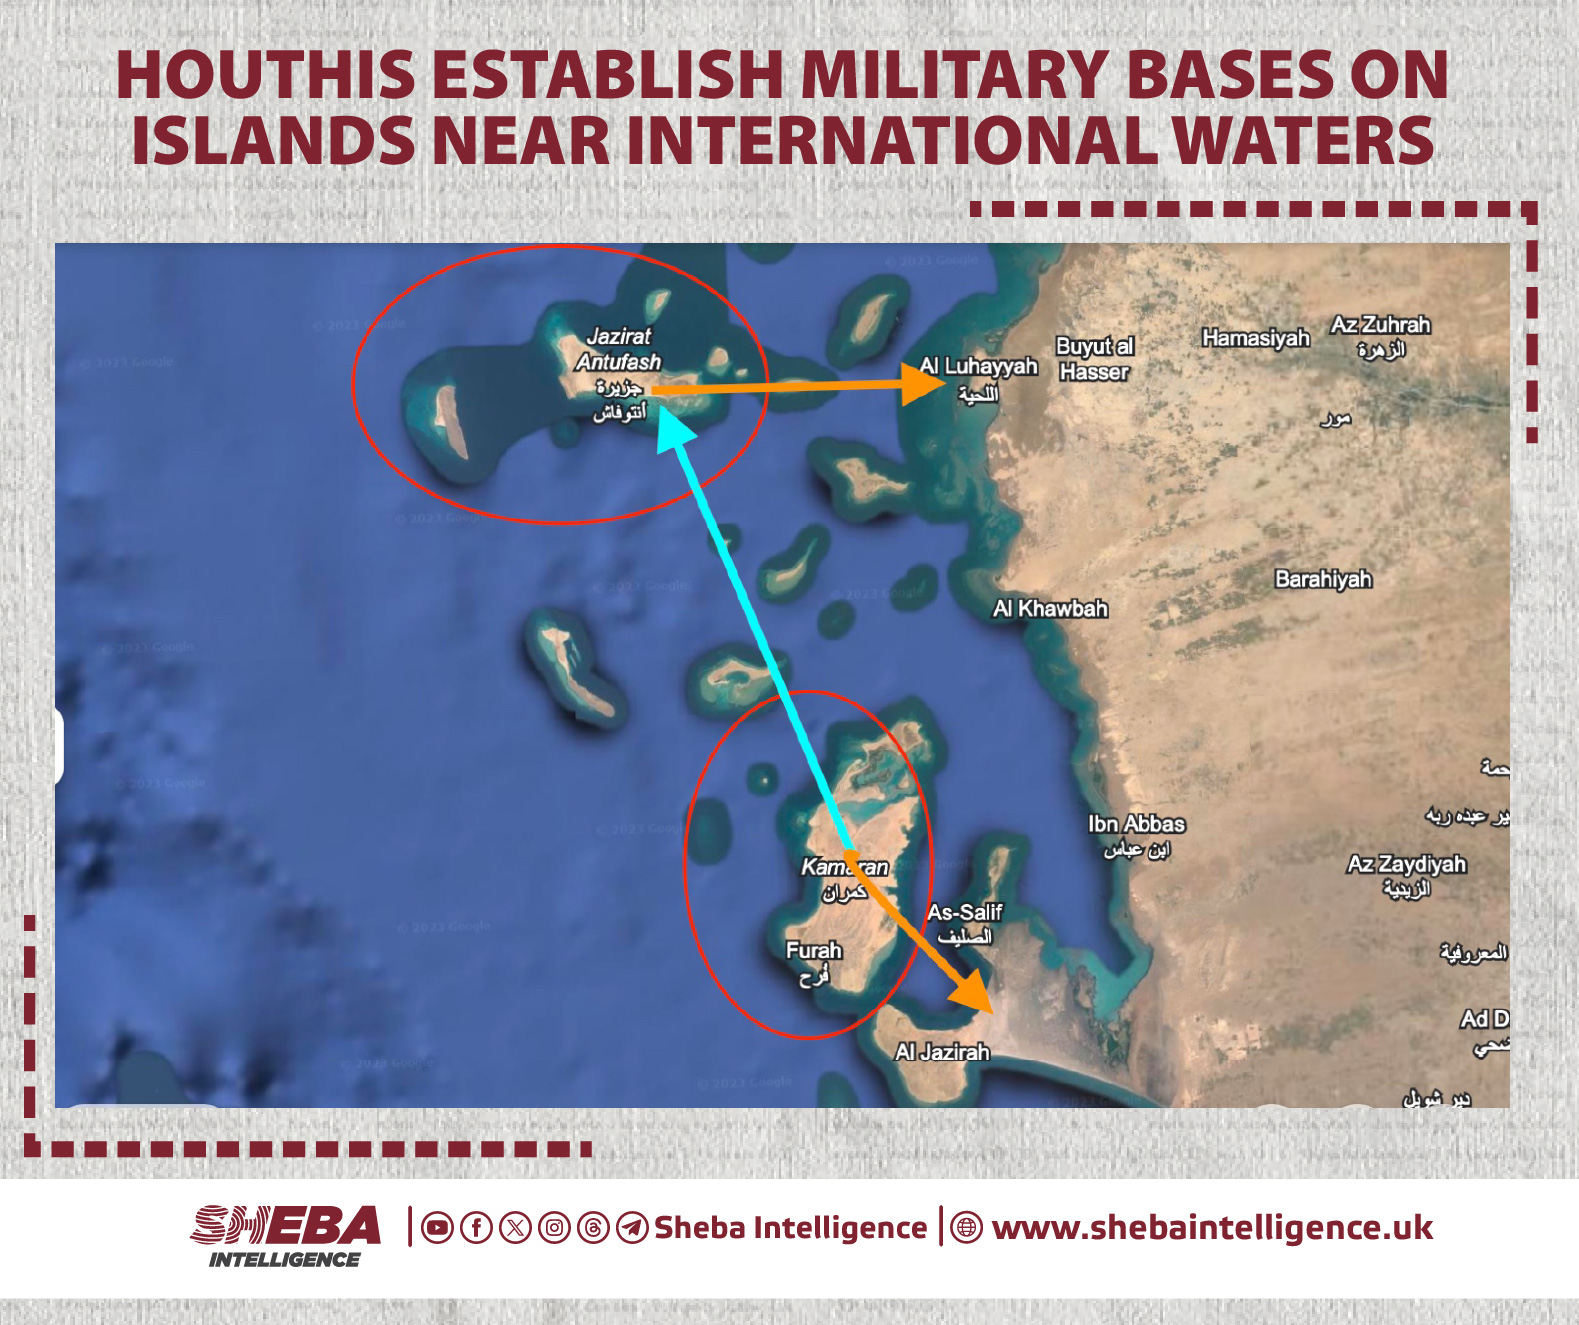 Houthis Establish Military Bases on Islands Near International Waters